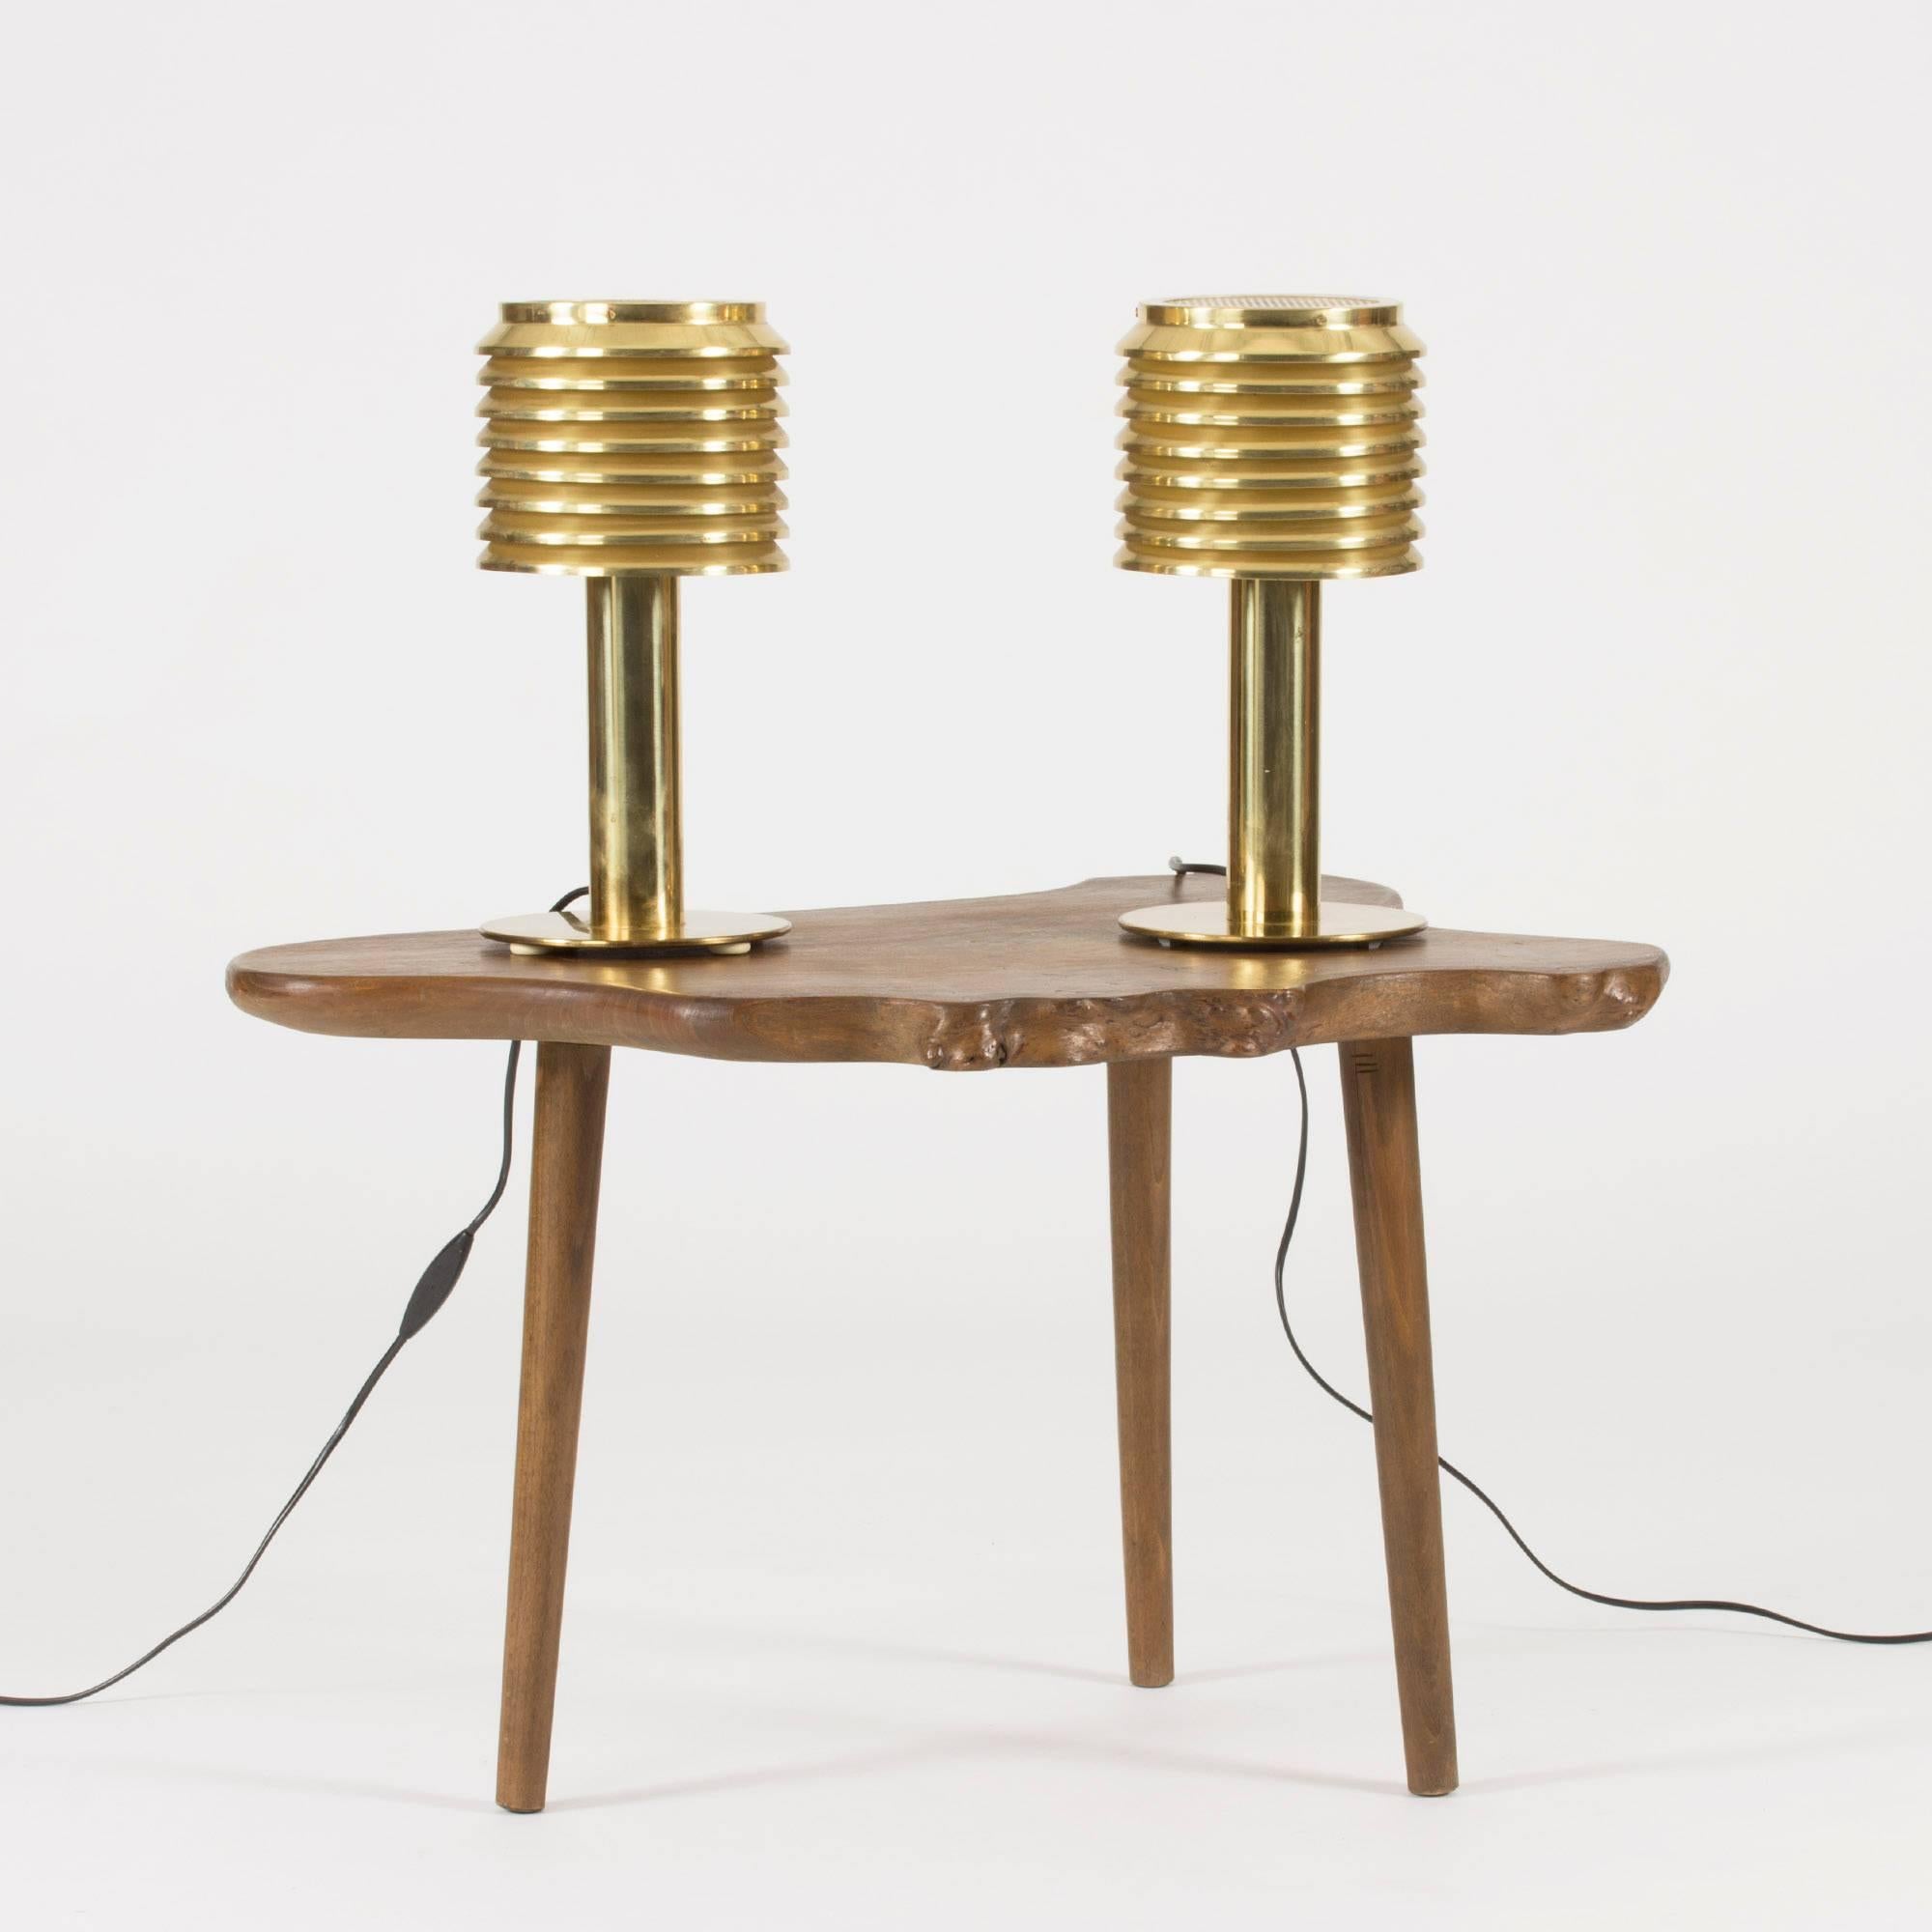 Pair of incredibly cool brass table lamps by Hans-Agne Jakobsson. Brass lamellas are stacked in a tight design and the light is shielded at the top by perforated spheres.